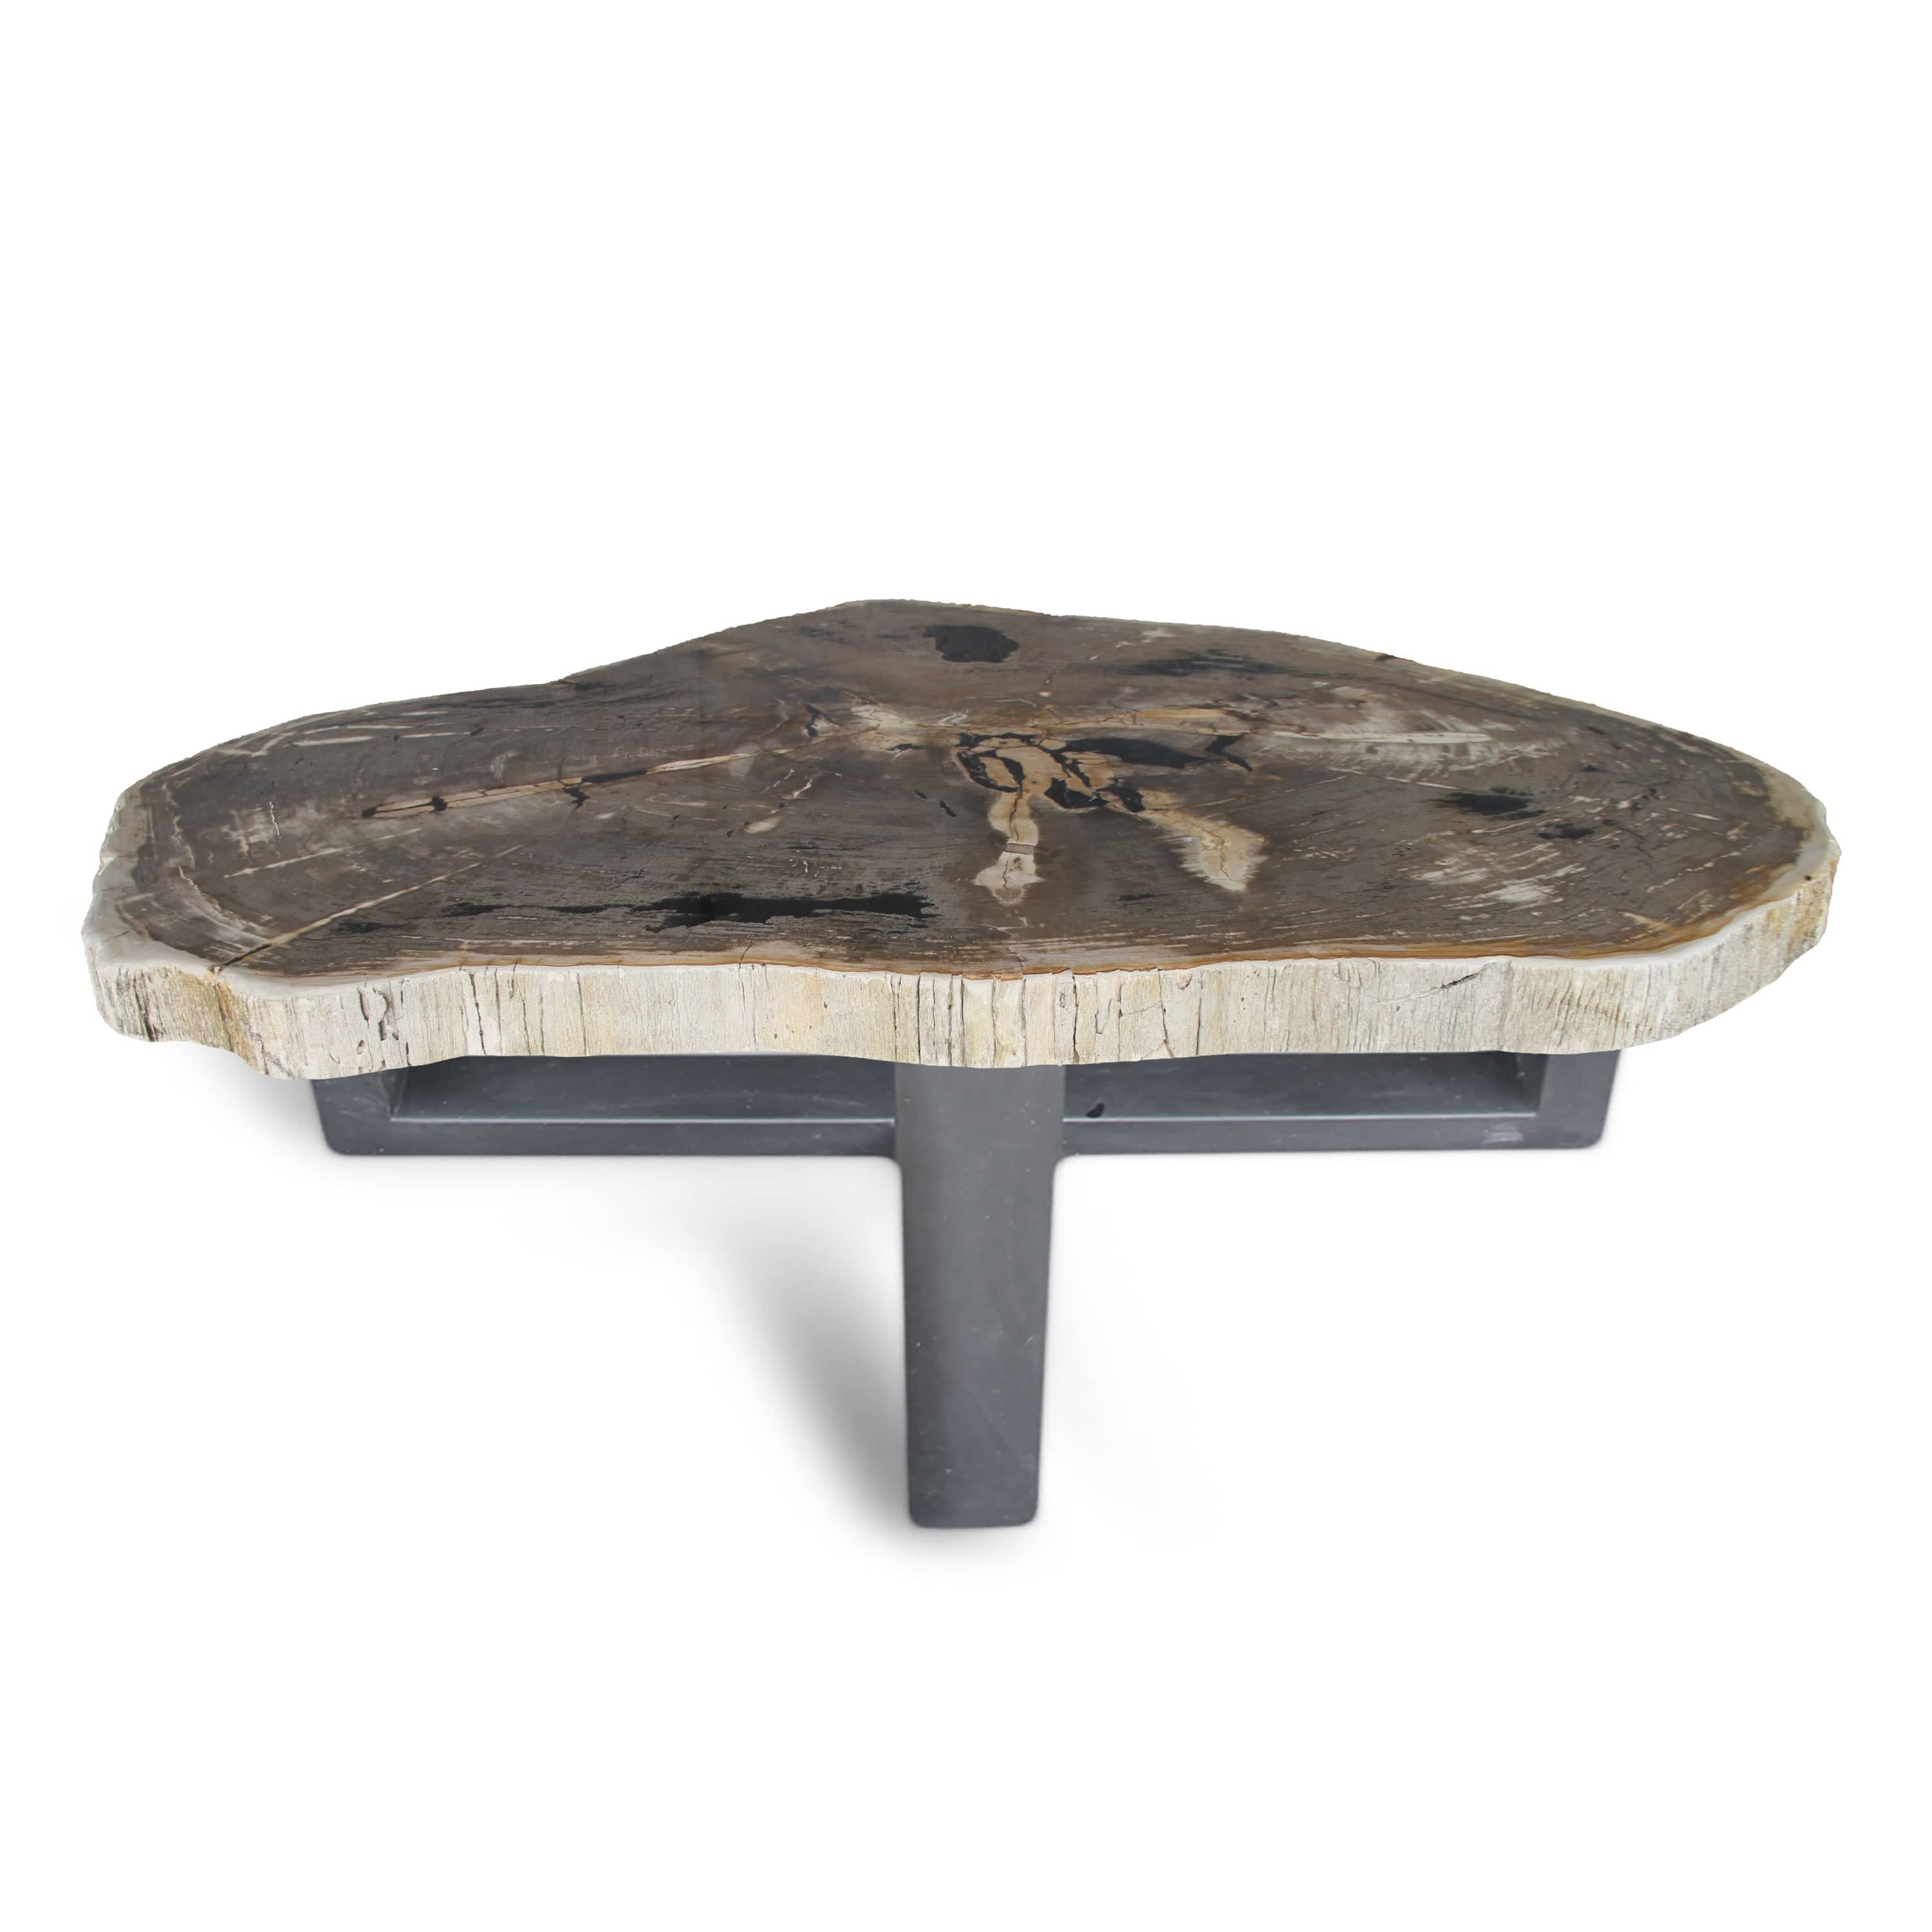 Kalifano Petrified Wood Petrified Wood Round Slab Coffee Table from Indonesia - 62" / 462 lbs PWT16800.001